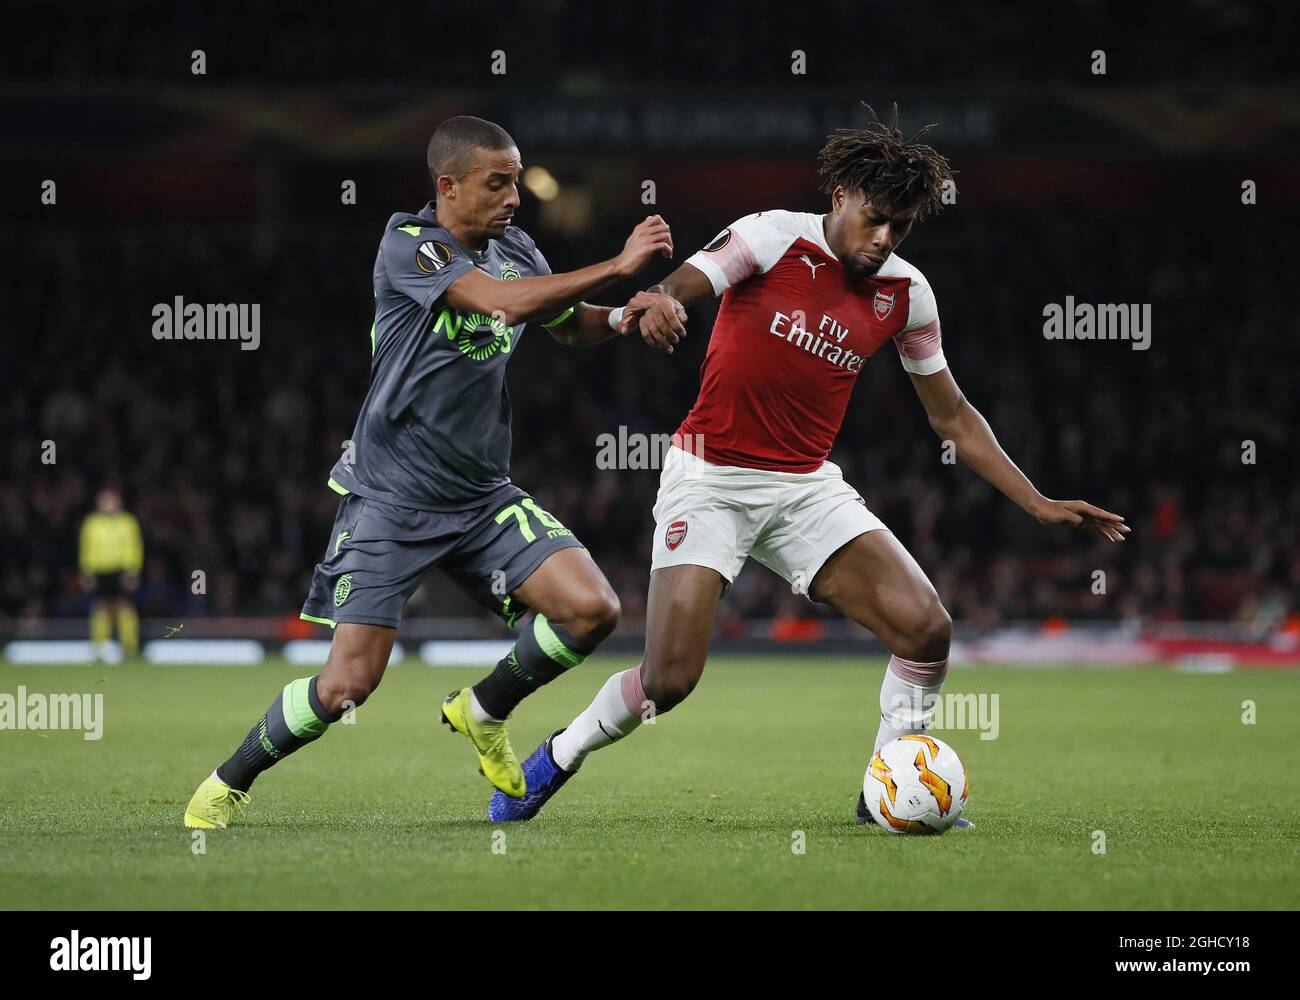 Bruno Gaspar of Sporting Lisbon tackles Alex Iwobi of Arsenal during the Europa League, Group E match at the Emirates Stadium, London. Picture date: 8th November 2018. Picture credit should read: David Klein/Sportimage  via PA Images Stock Photo